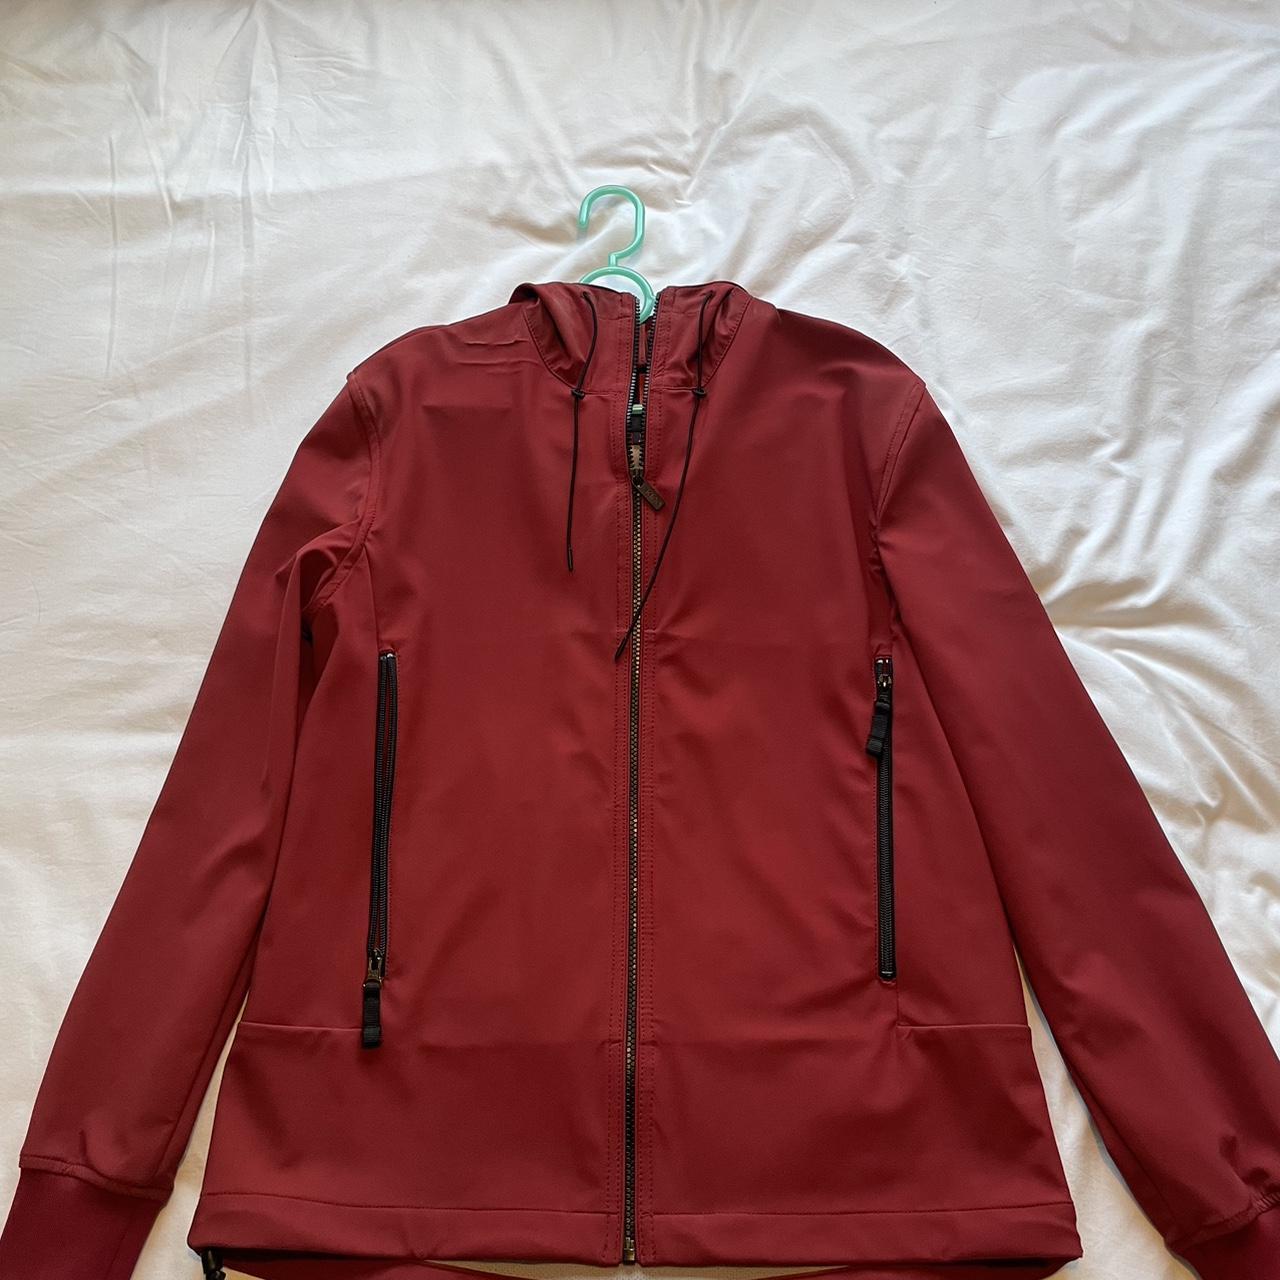 Men’s K-100 Soft Shell Jacket in Red. Bought from... - Depop